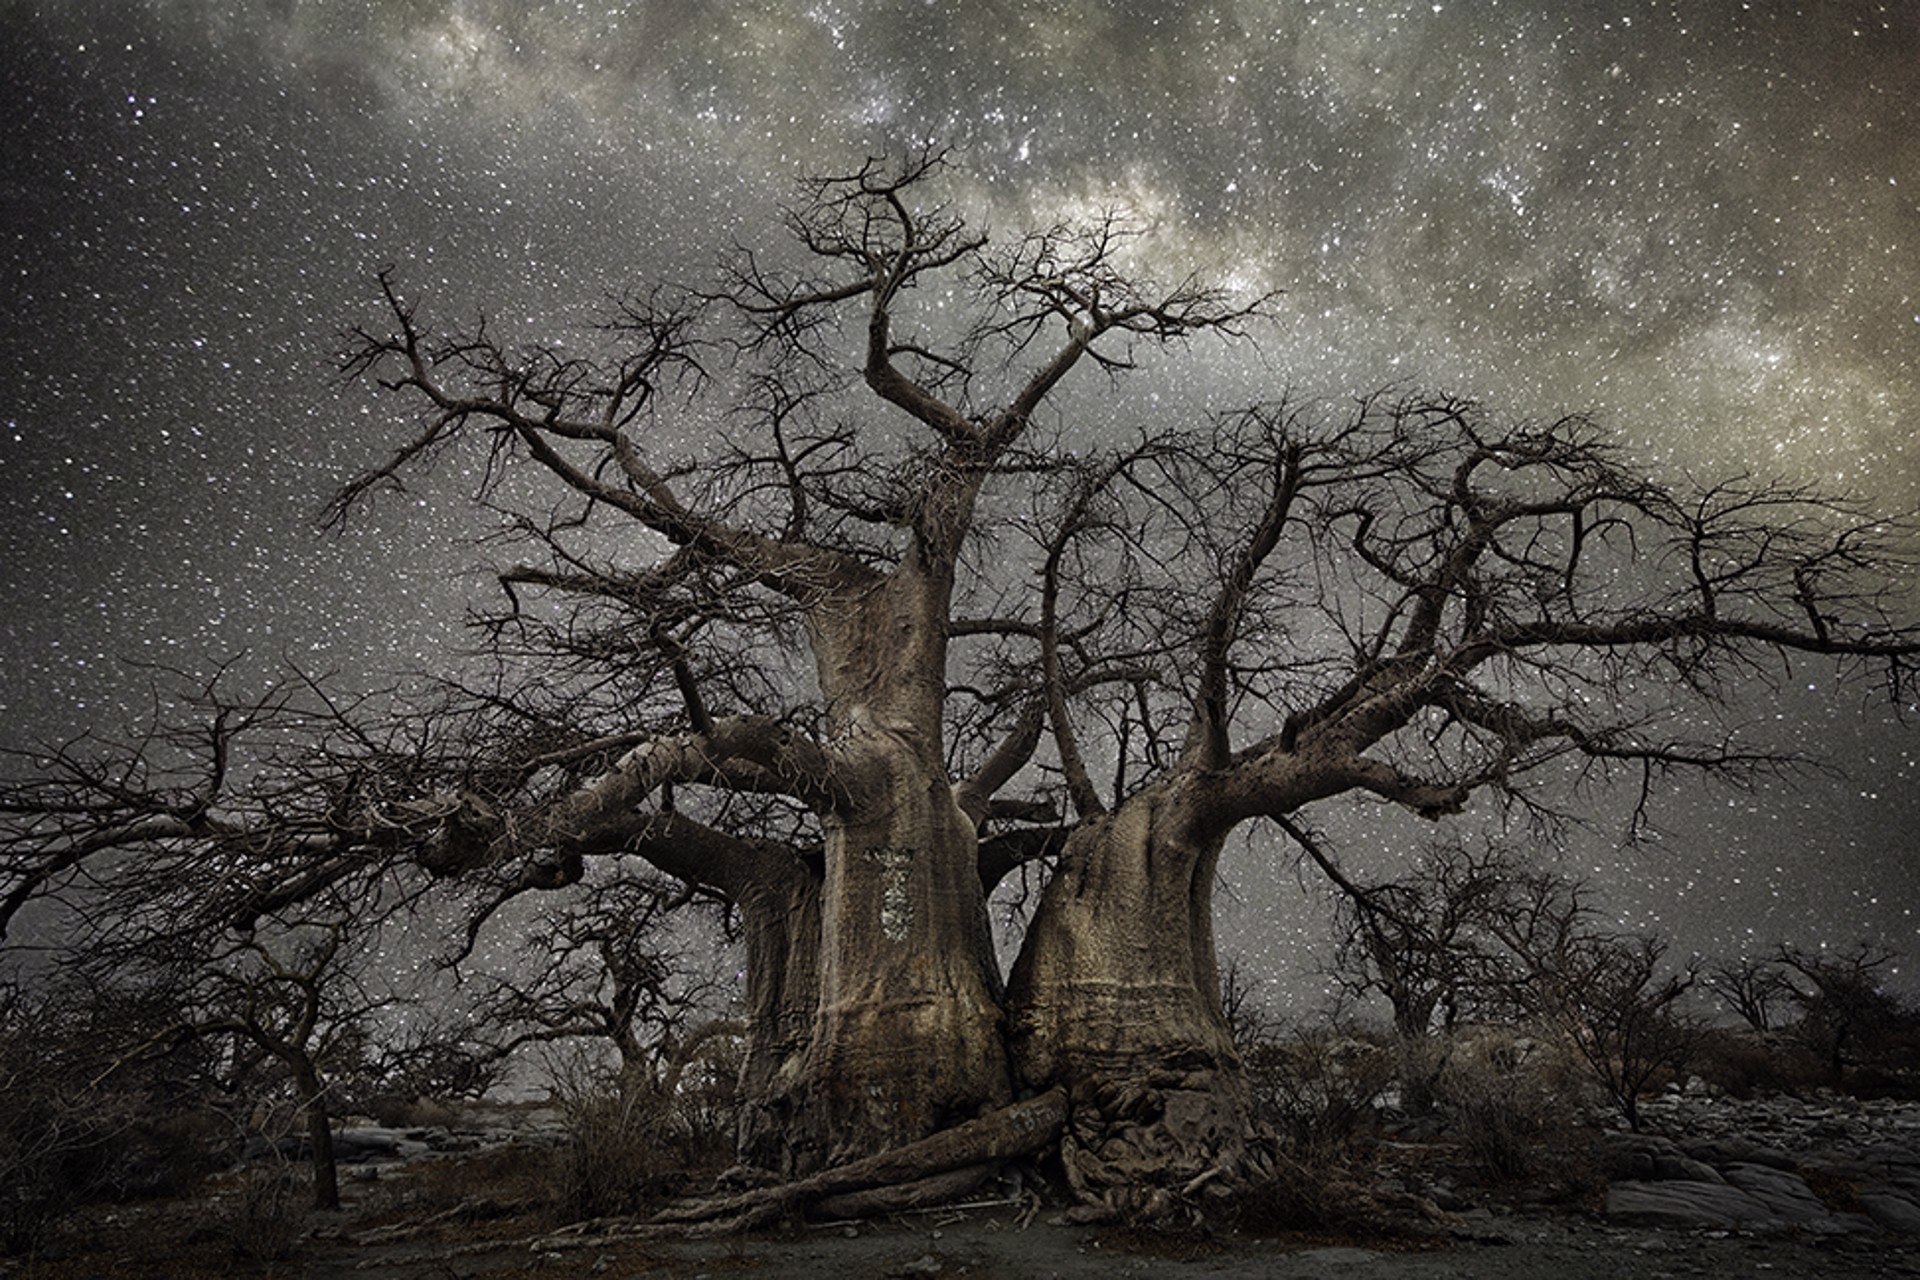 Fornax by Beth Moon